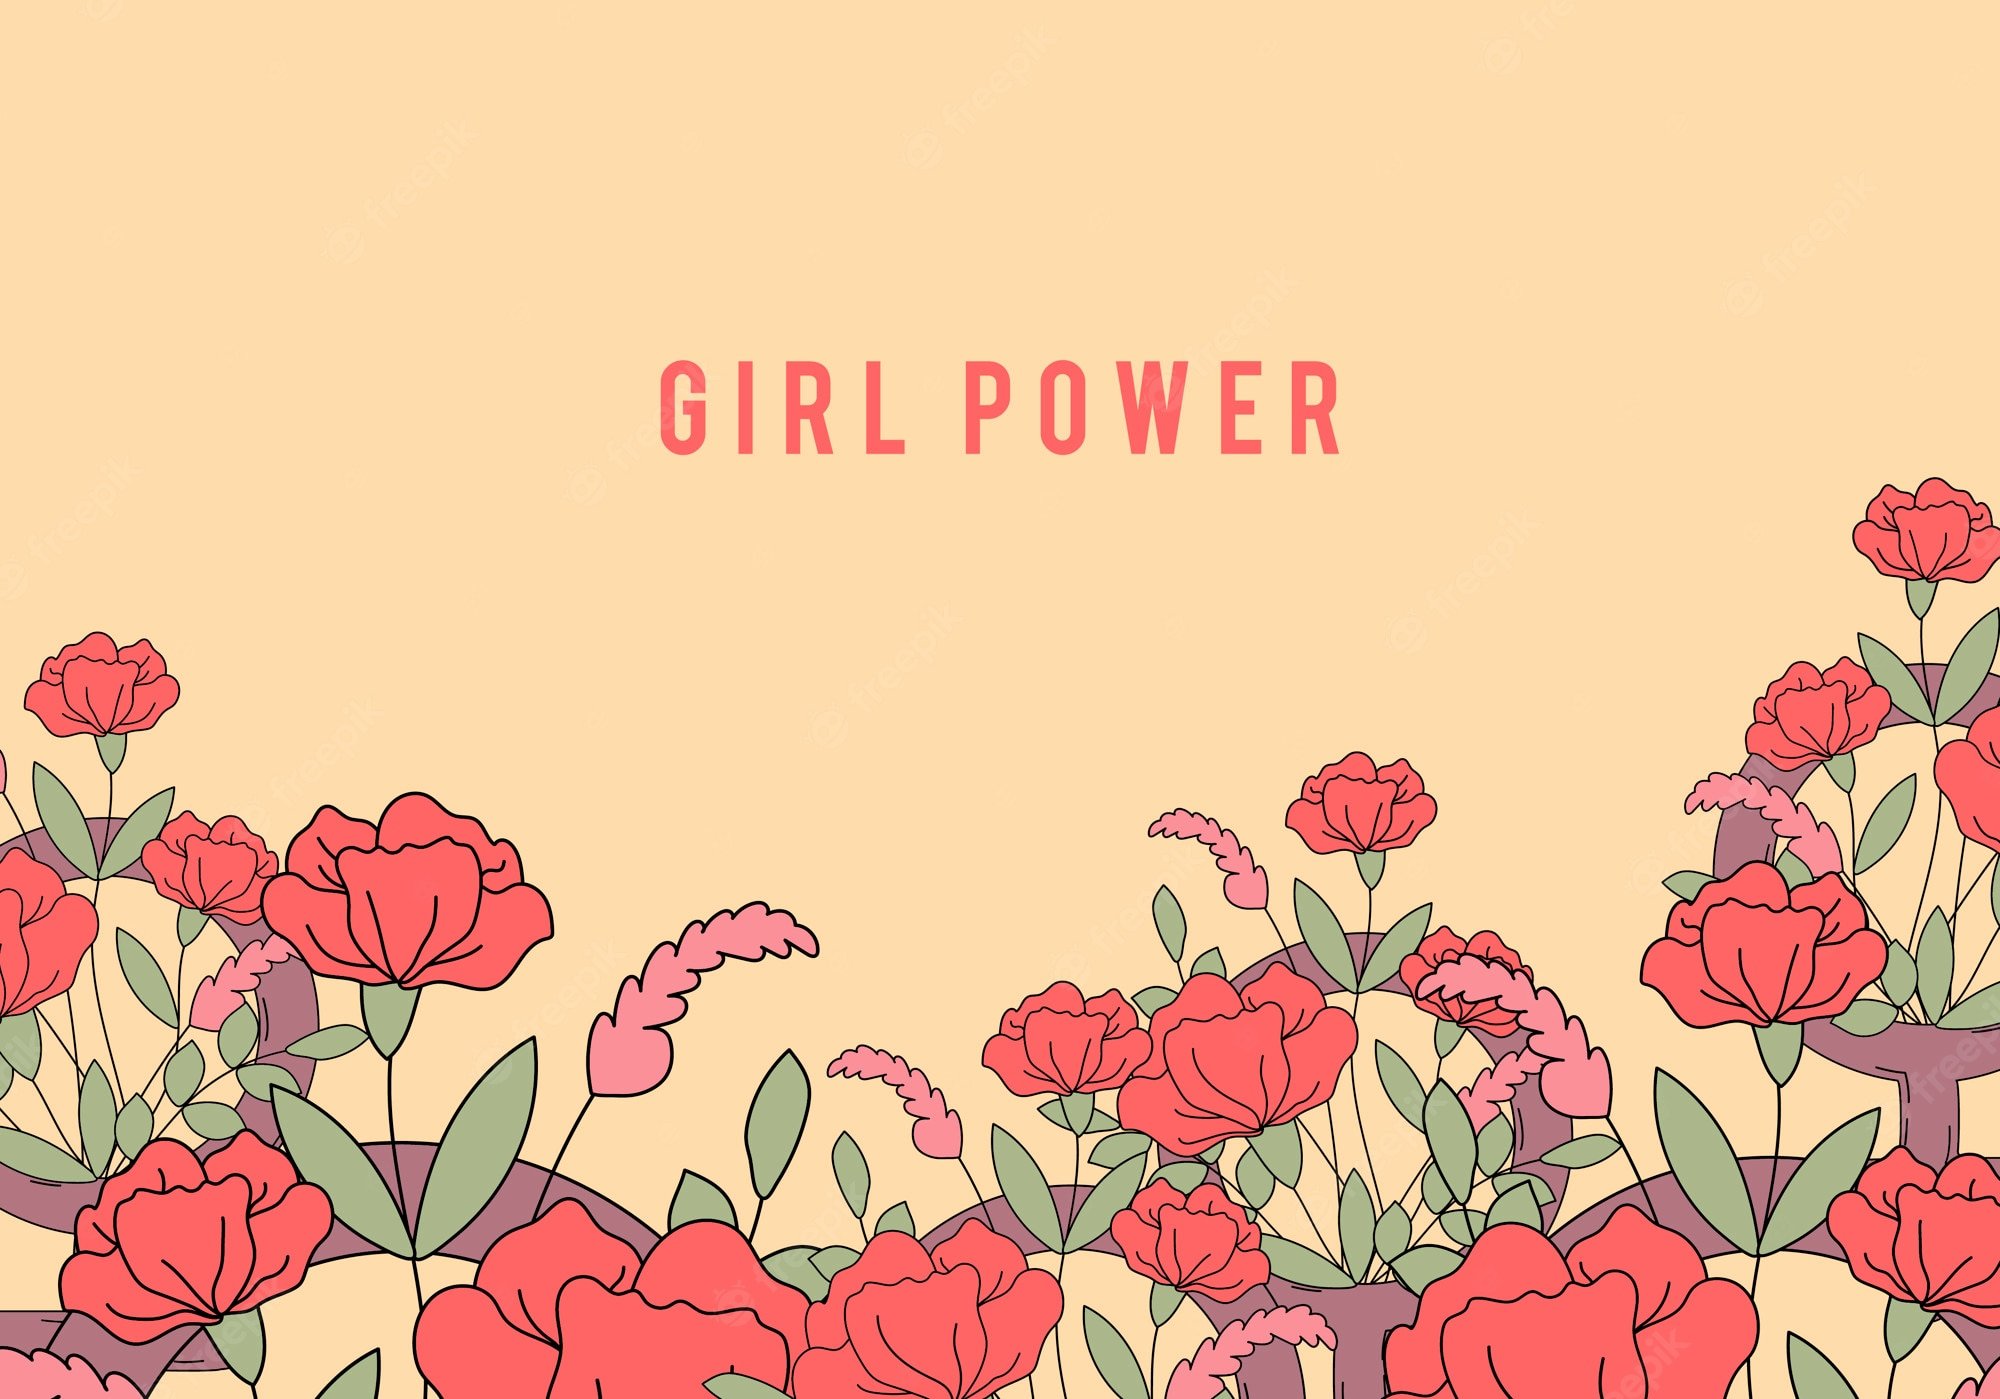 Free Vector. Girl power on floral background vector